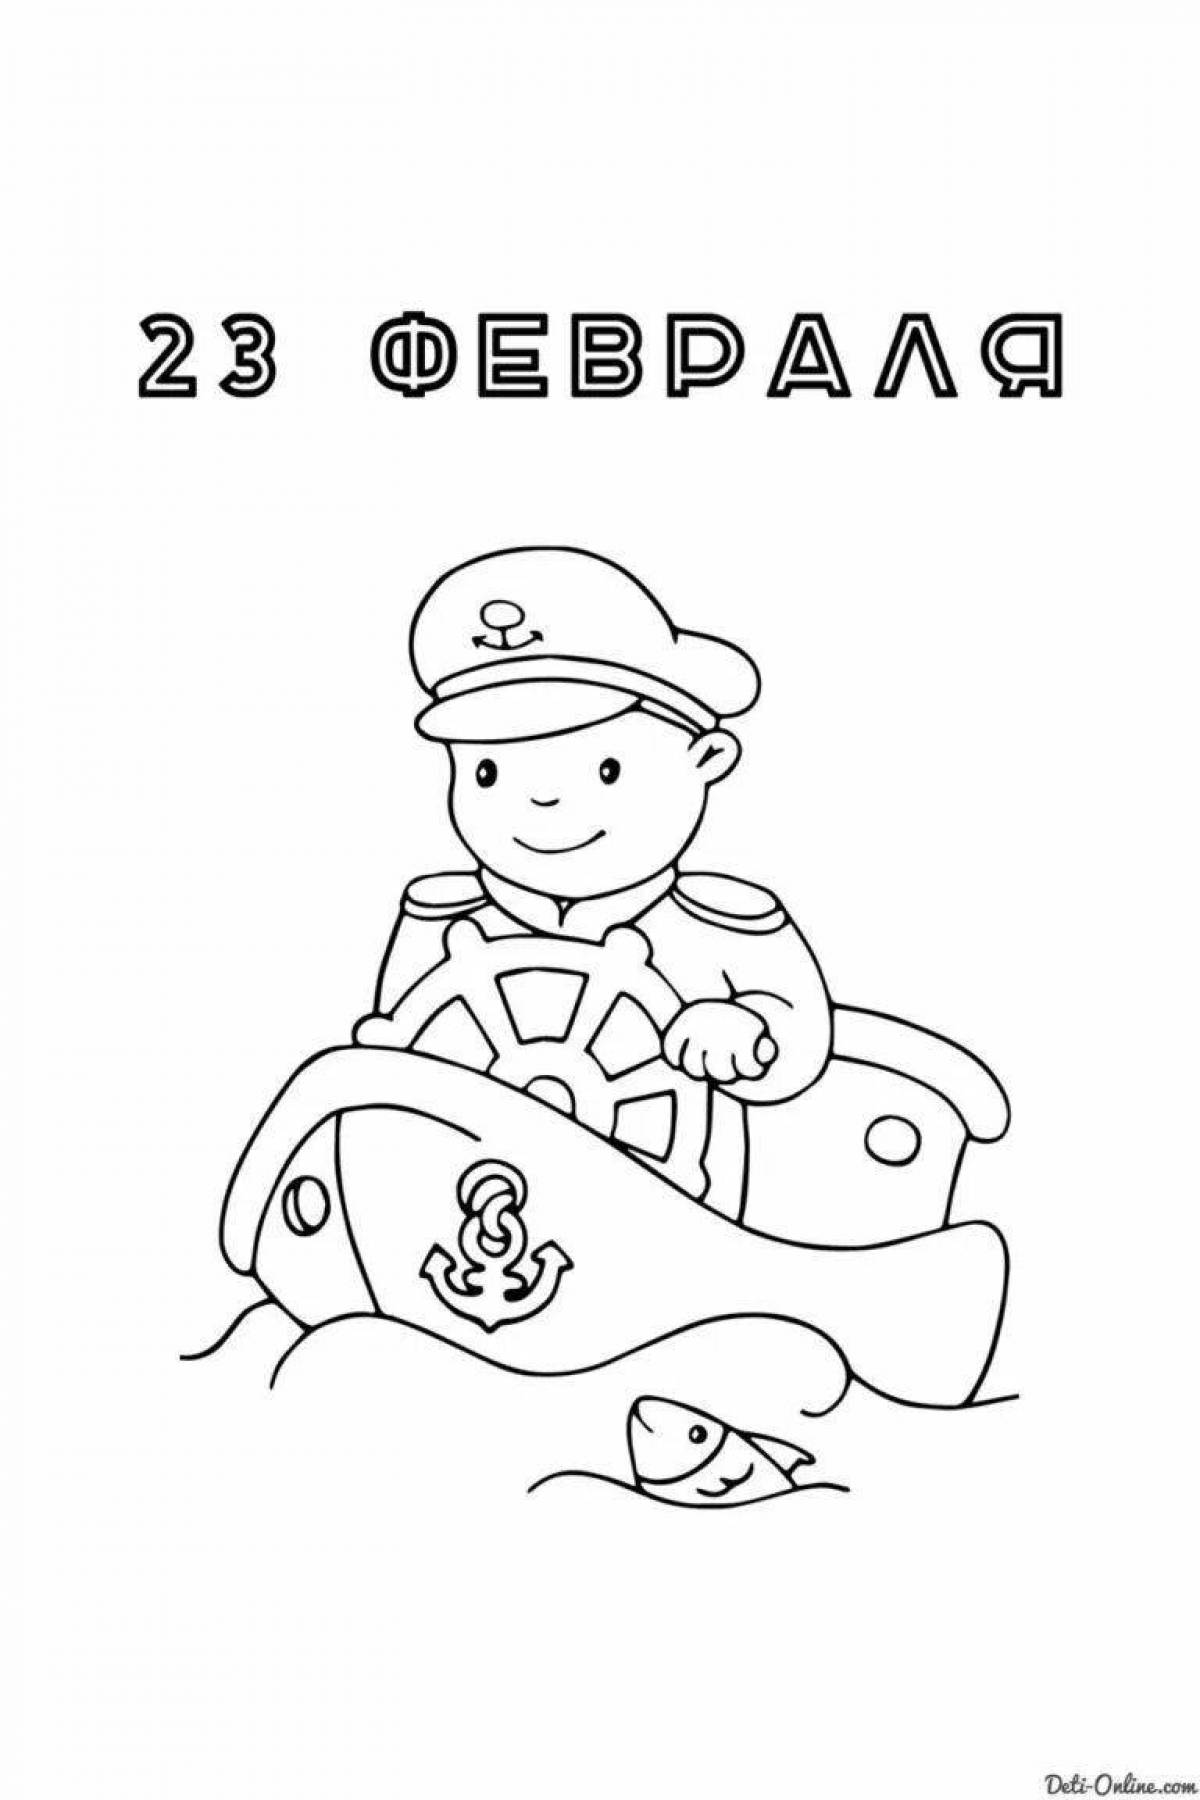 Creative coloring for February 23 for kindergarten